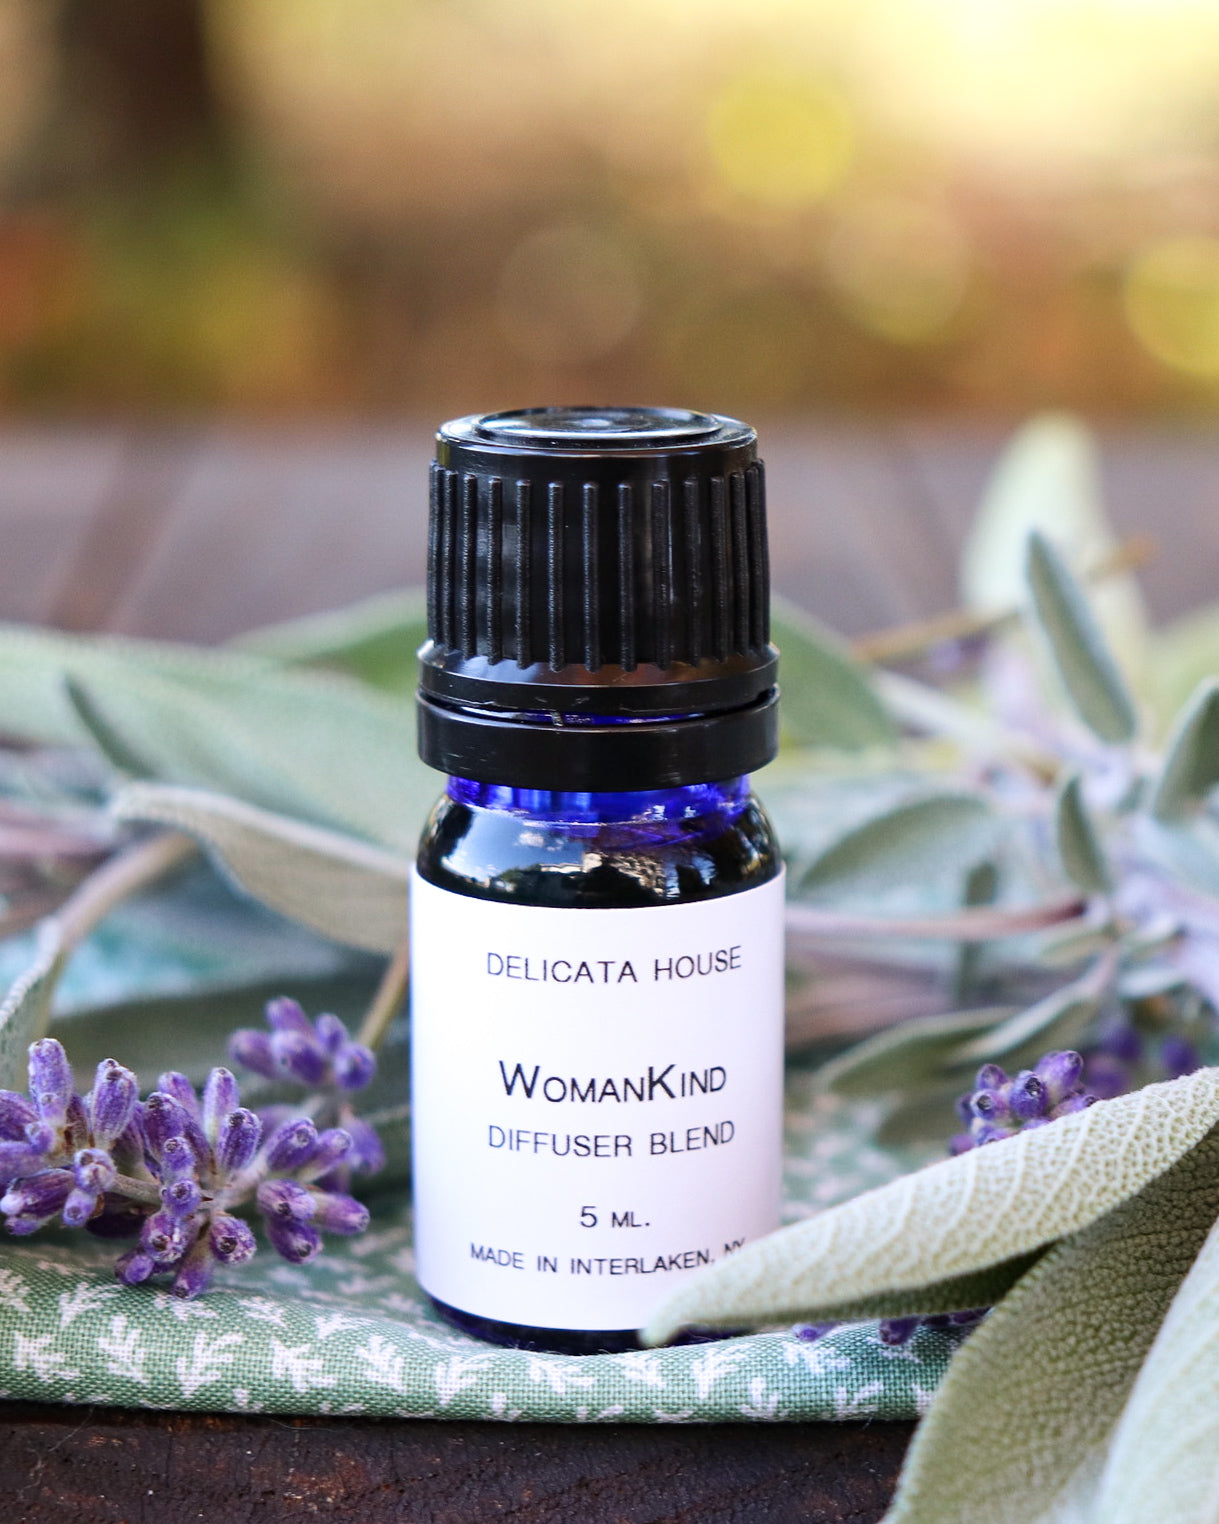 Aromatherapy Blend / PMS Care Aromatherapy Blend / Period Care Diffuser Blend / Women's PMS Essential Oil Blend / Natural PMS Relief / Calming Aromatherapy